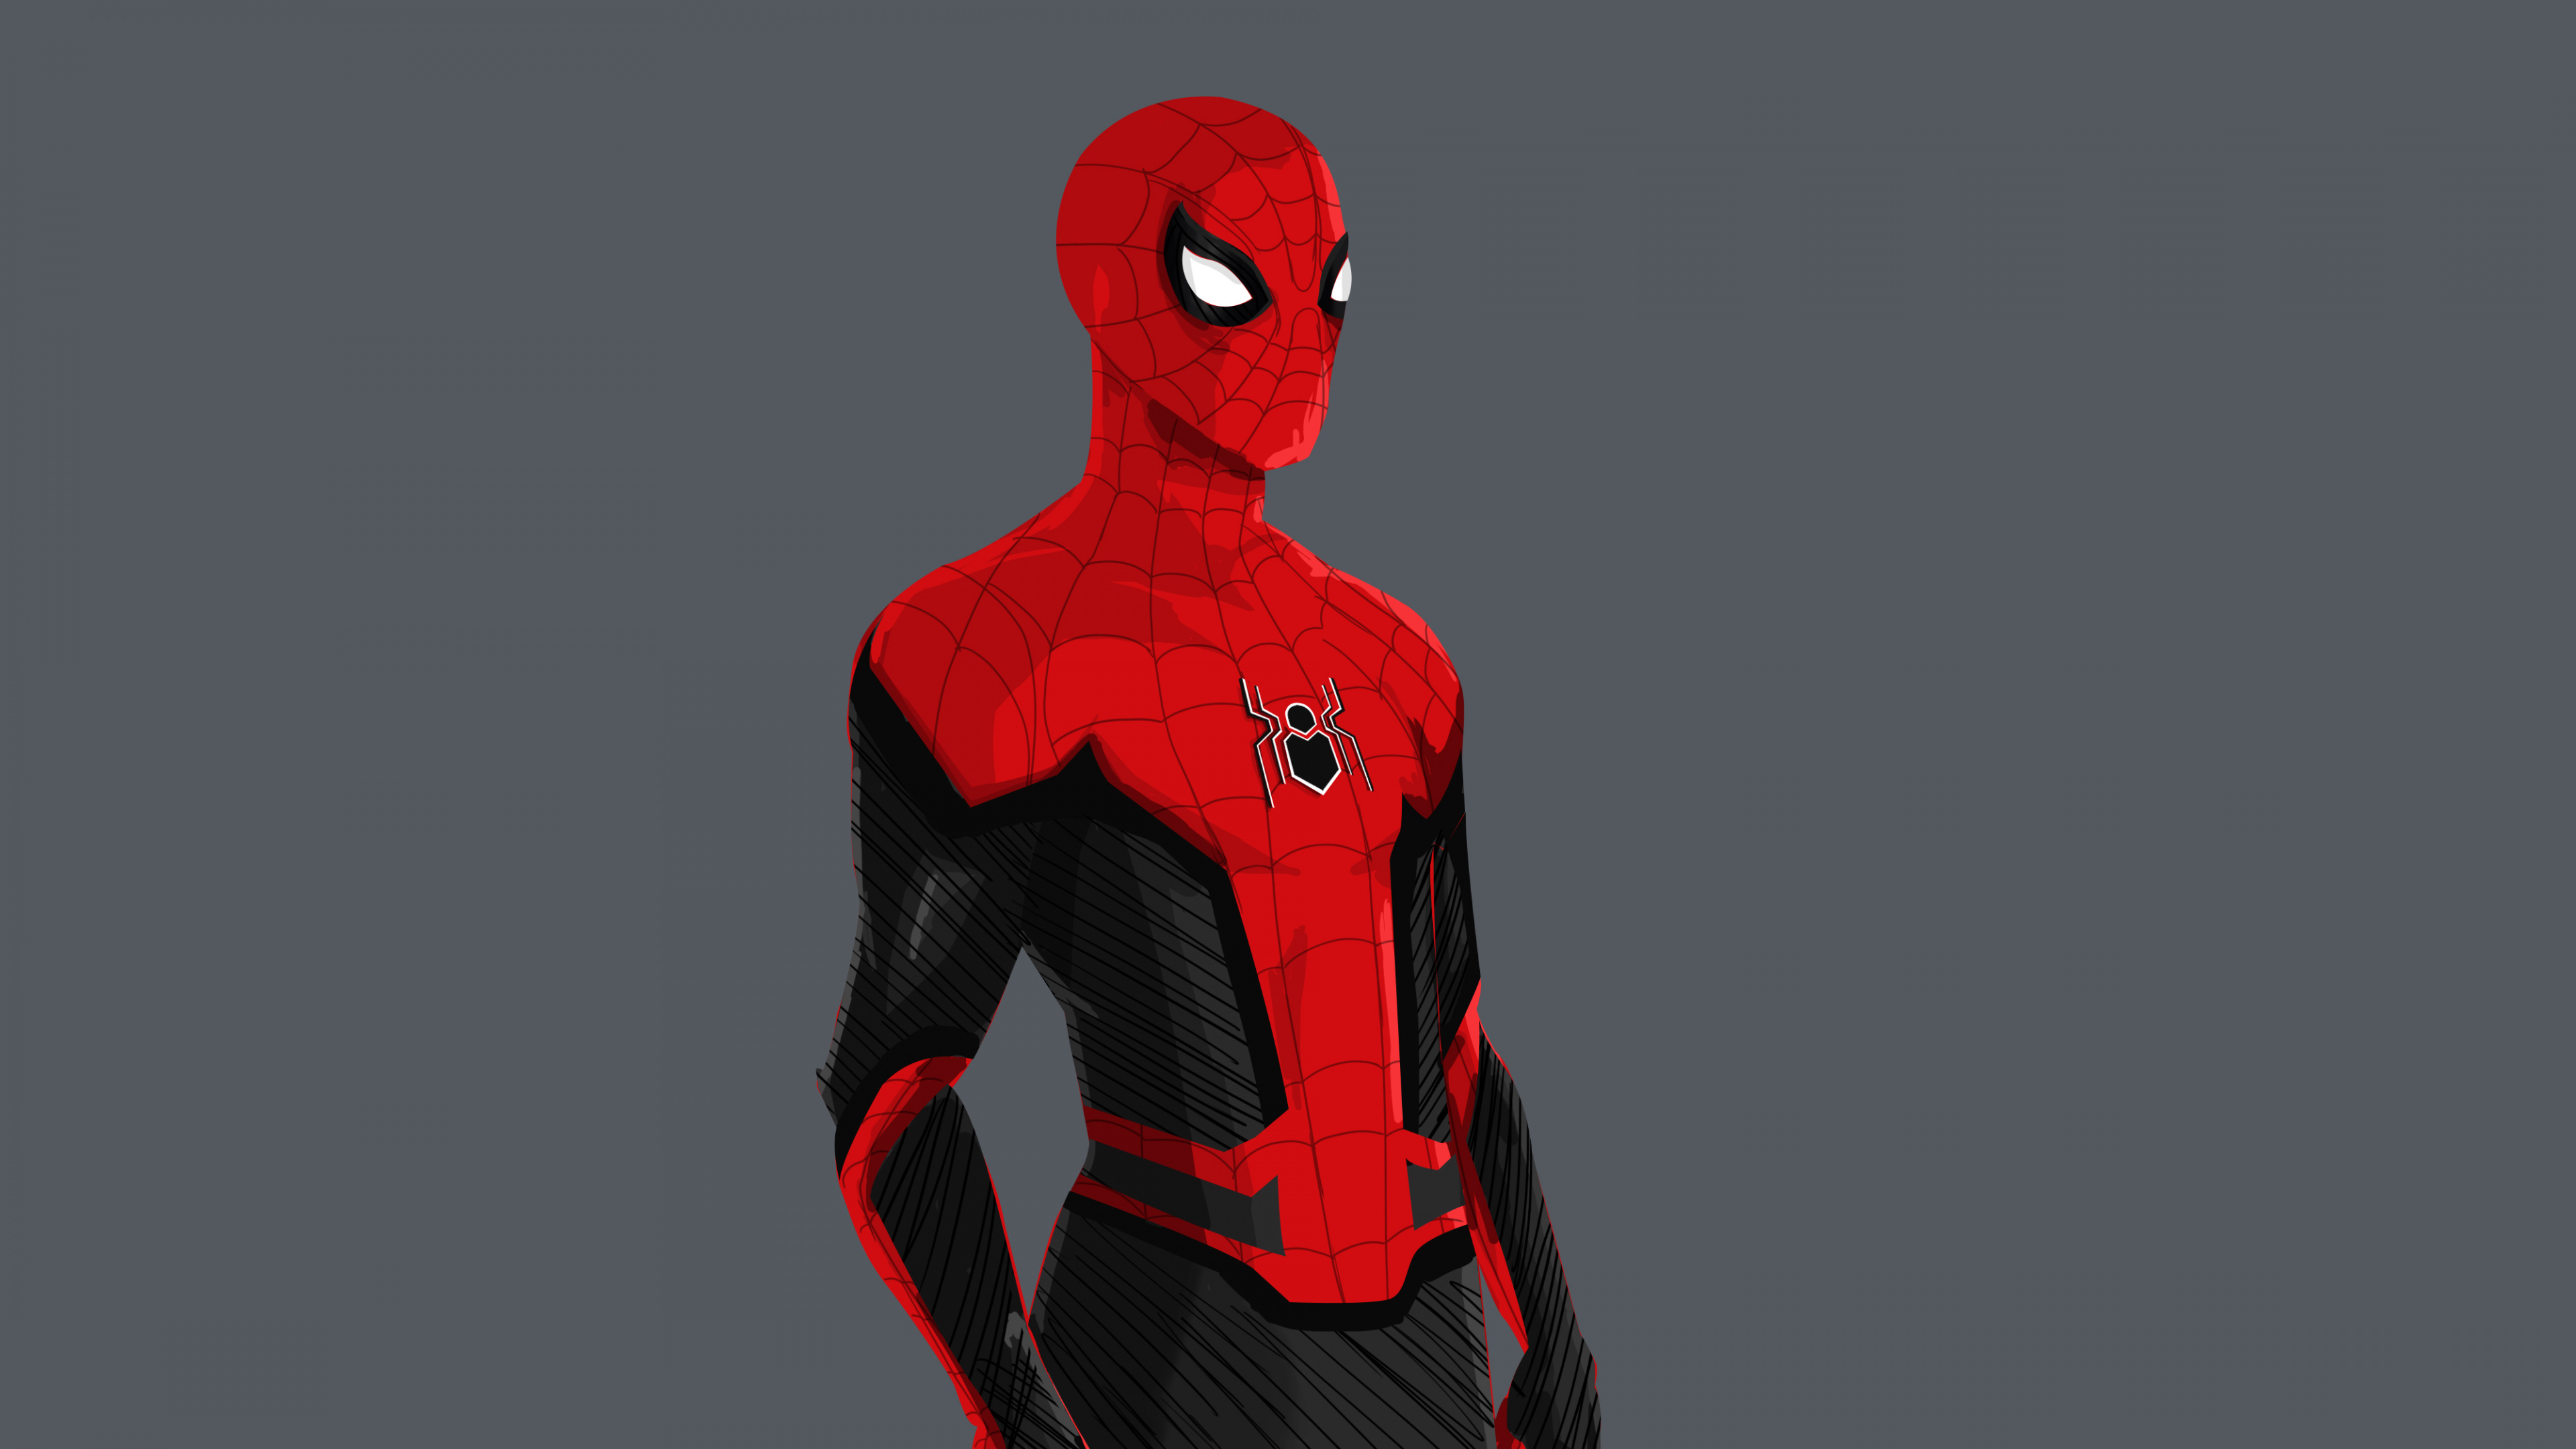 Red and Black Spider Man Illustration. Wallpaper in 3840x2160 Resolution